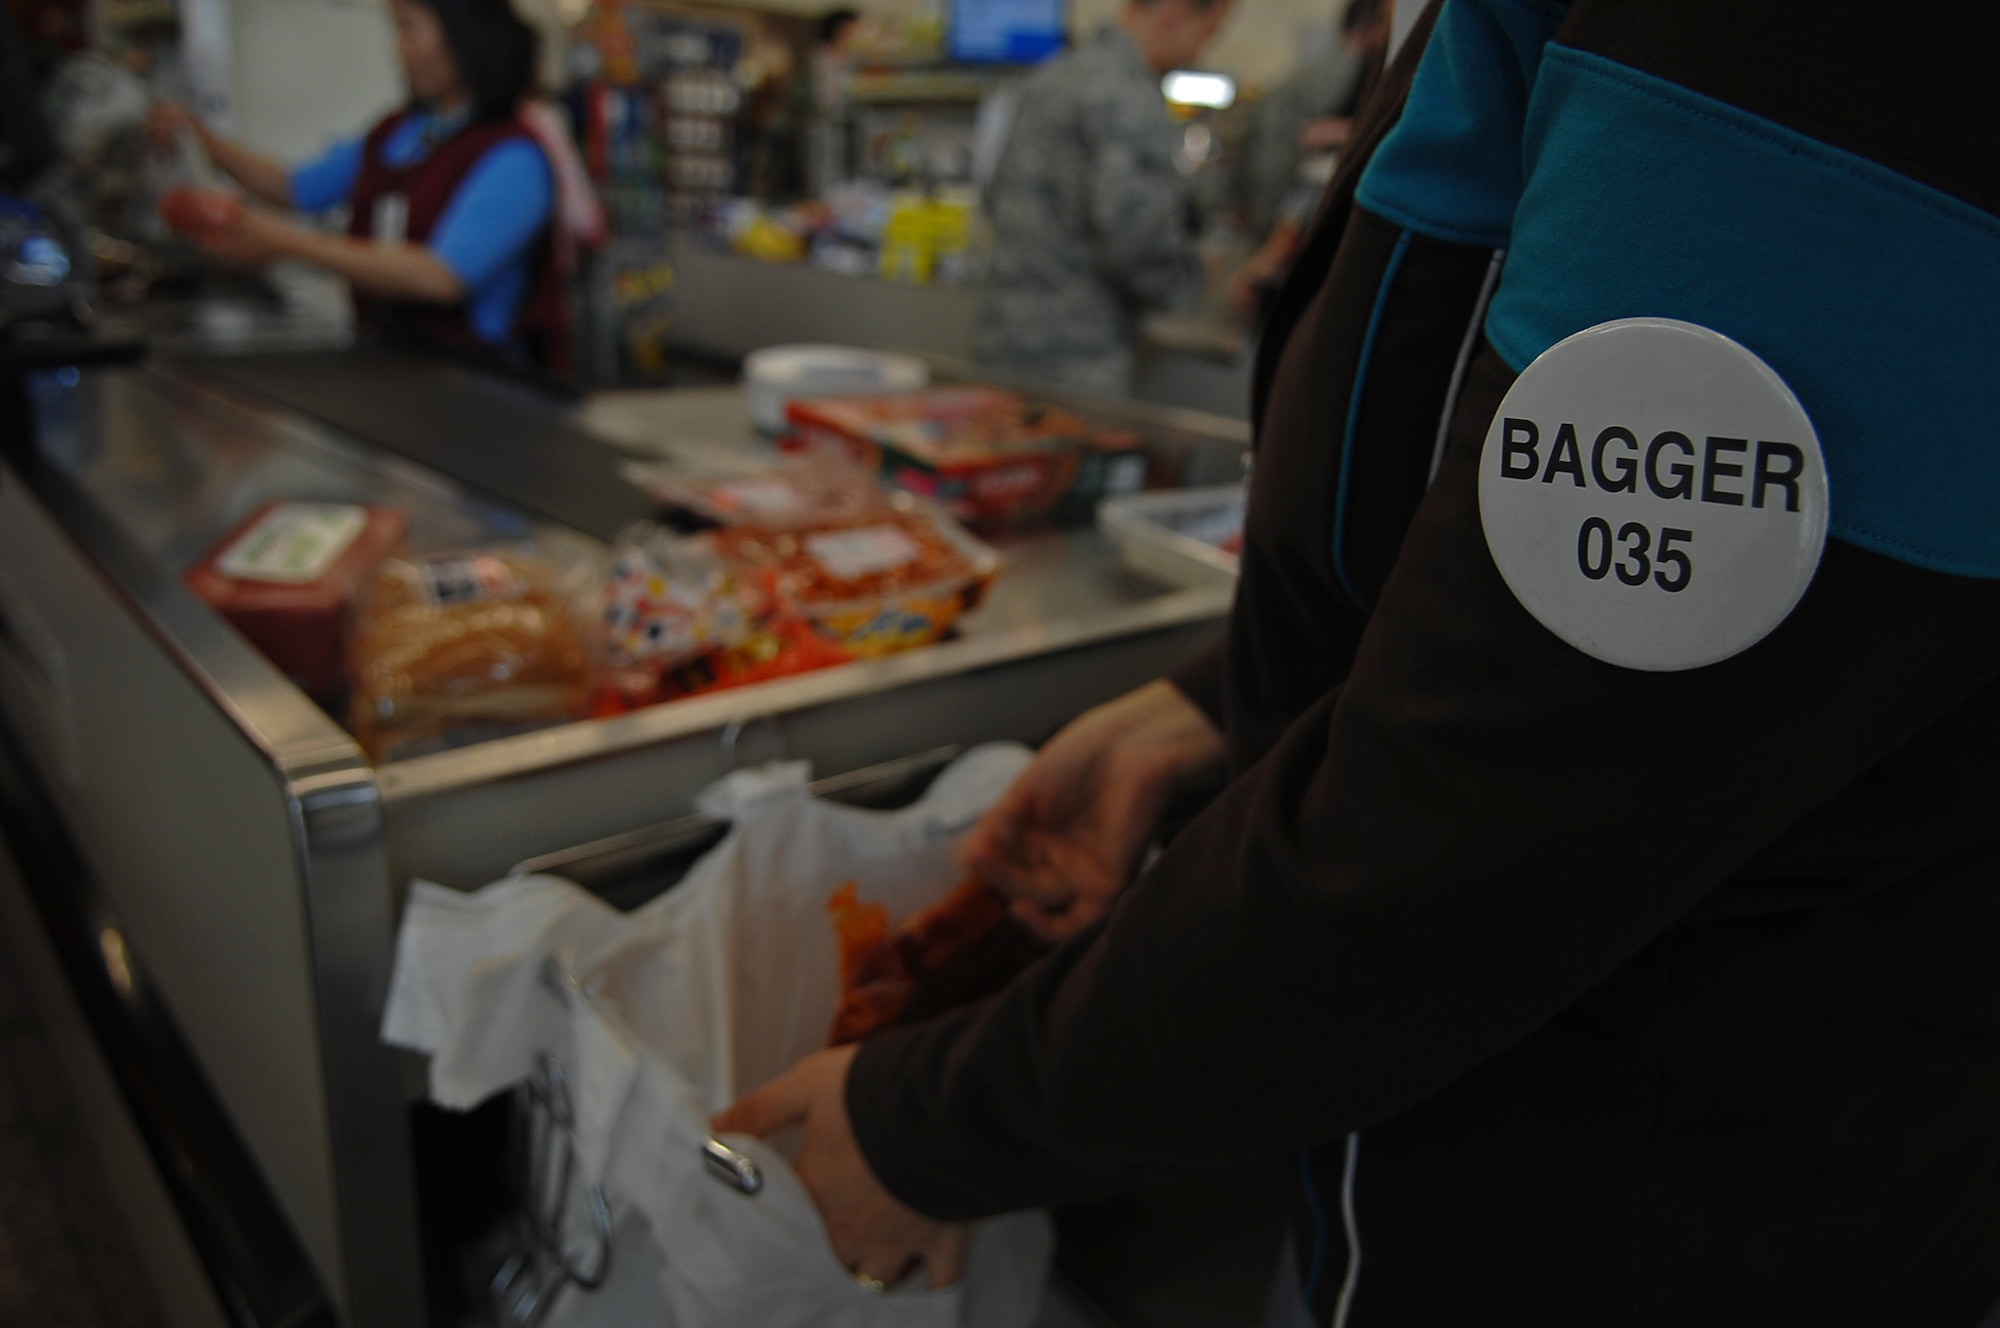 A commissary bagger bags a customer's  groceries, Ramstein Air Base, Germany, April 23, 2009. Baggers are self-employed and work under a license agreement with the installation commander. (U.S. Air Force photo by Airman 1st Class Tony R. Ritter)